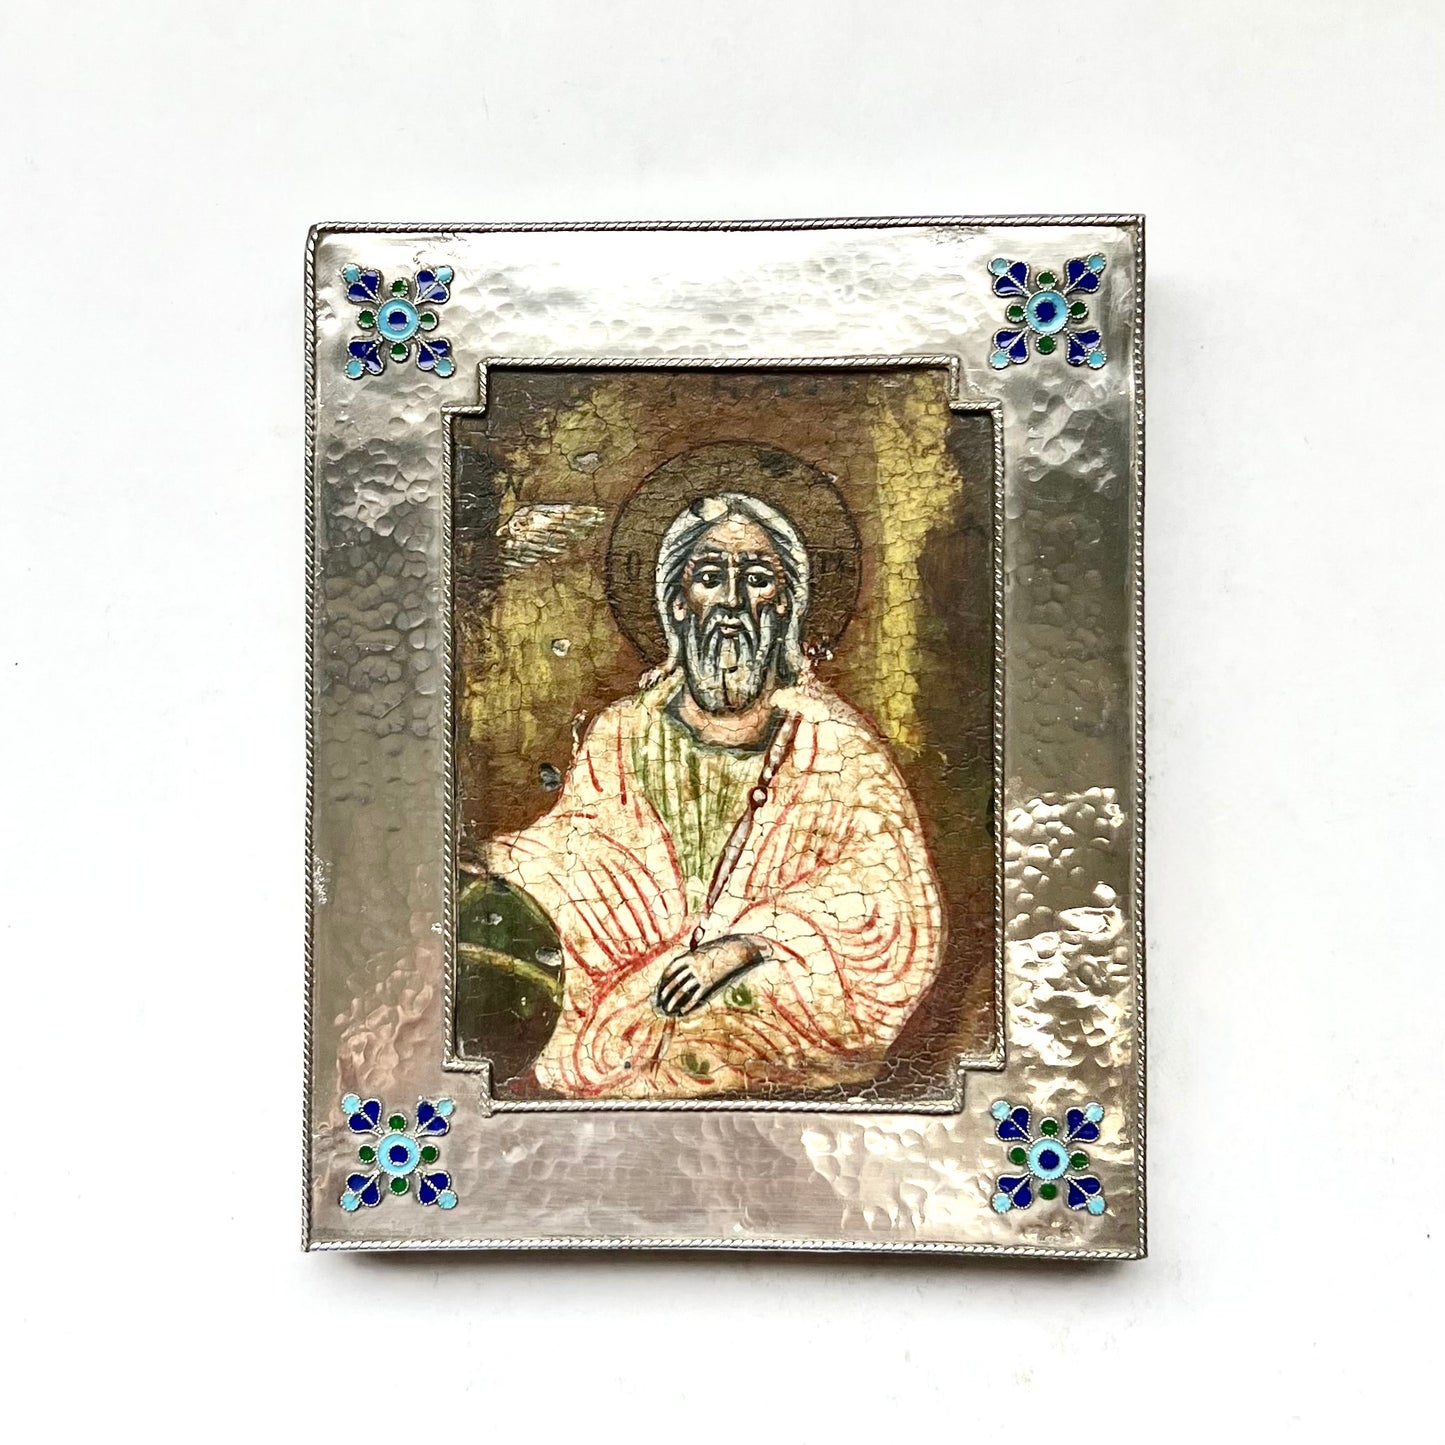 Early 20th century European icon of a finely painted Orthodox saint with hand-hammered .950 silver frame